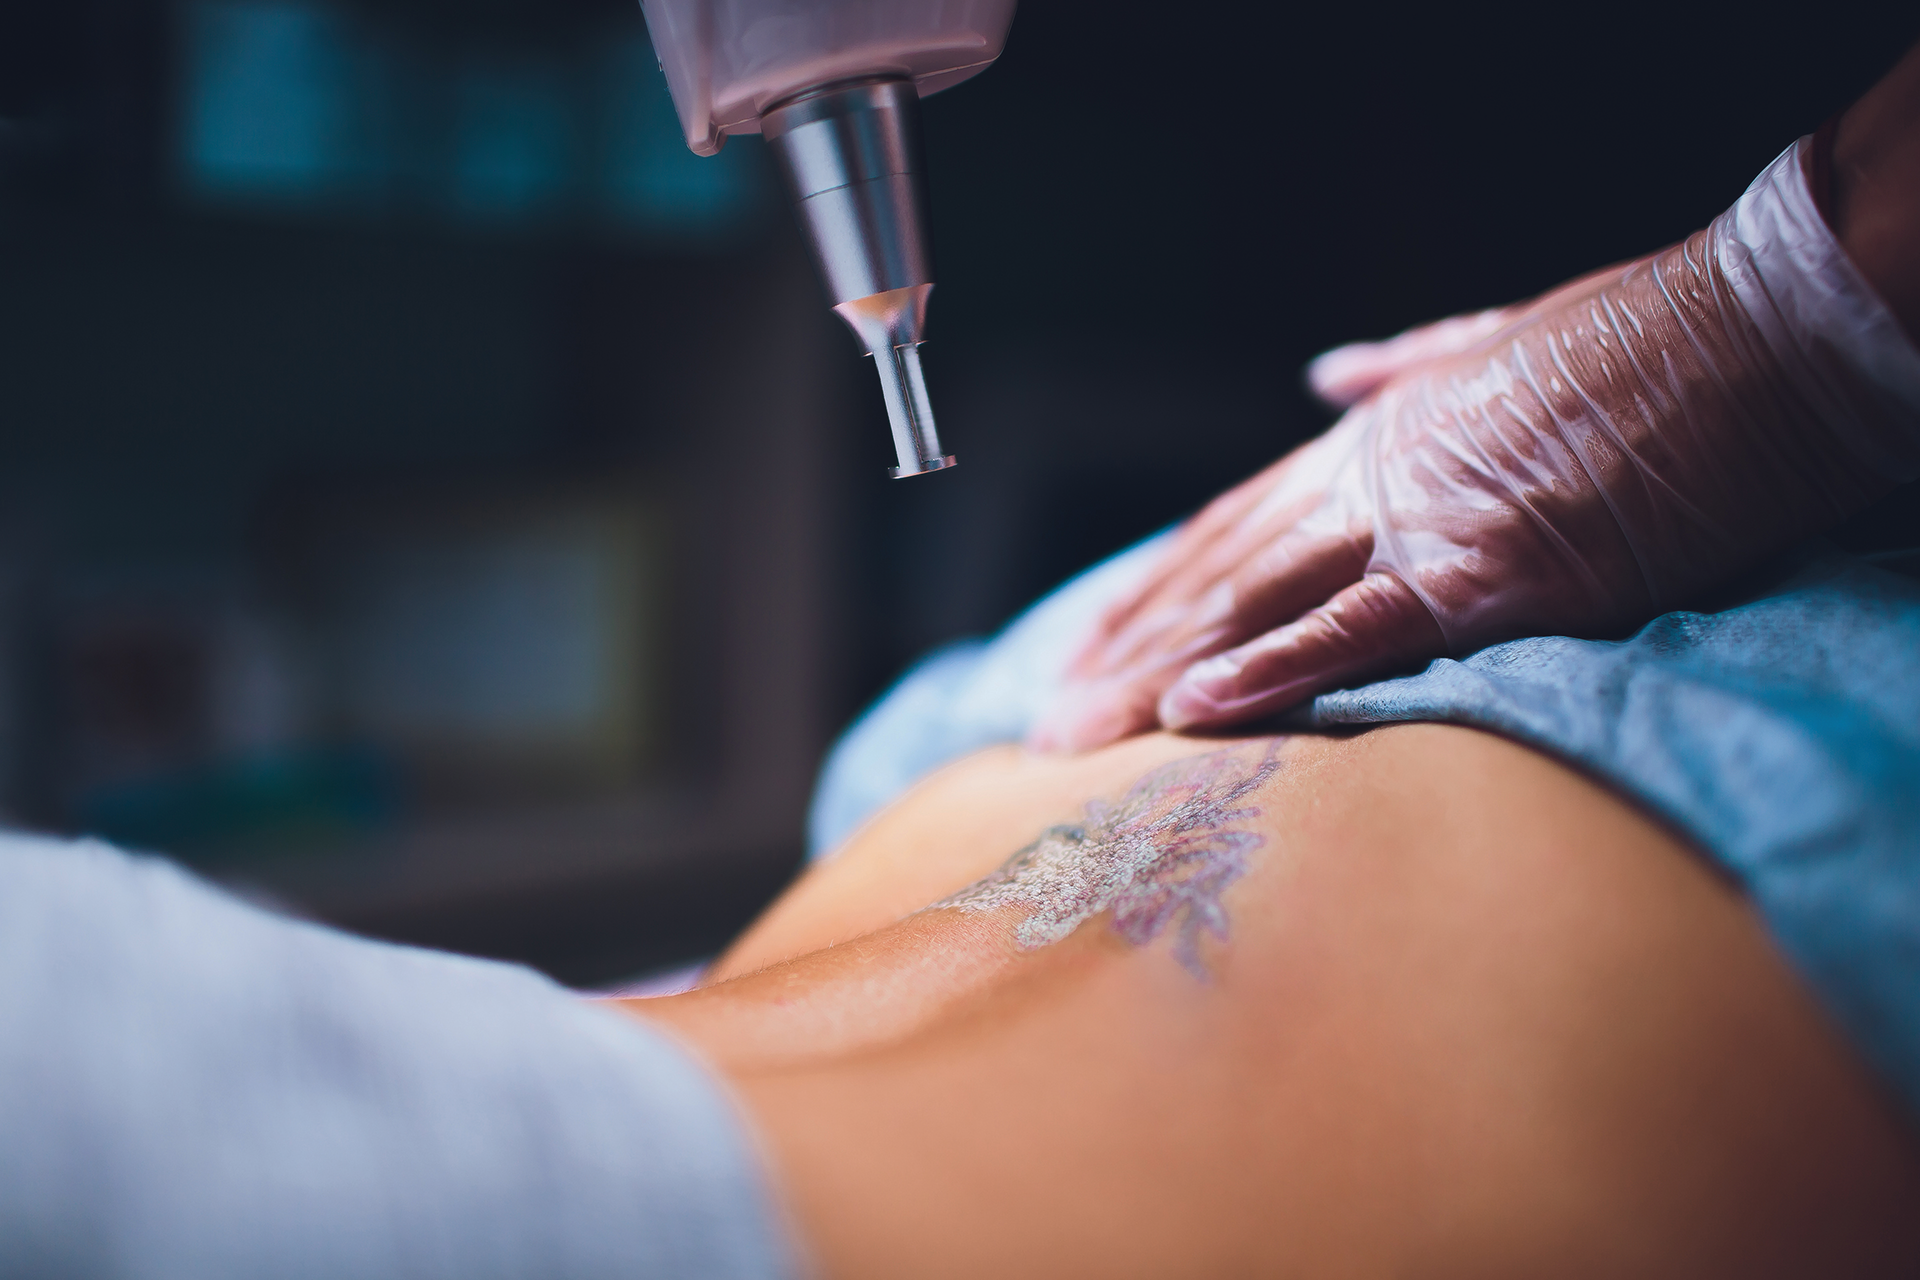 laser tatoo removal treatment at our dermatologists office in Virginia Beach  treating laser tatoo removal